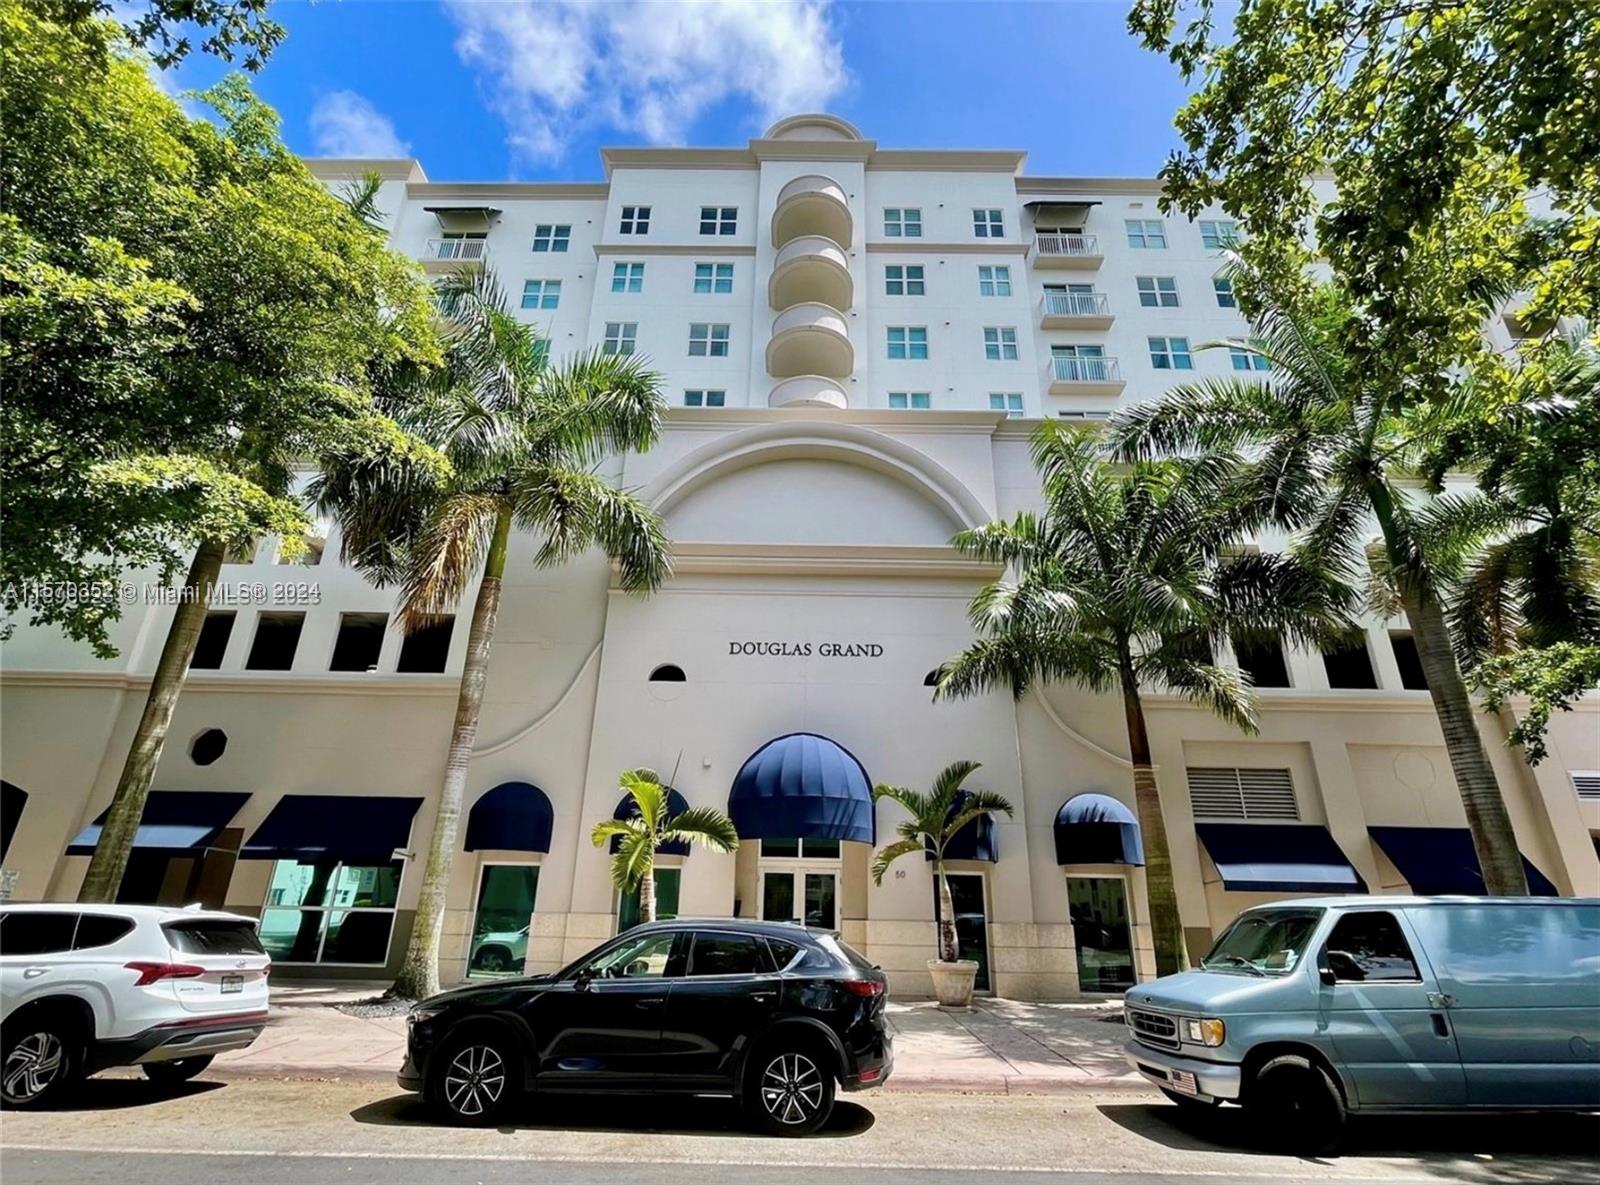 Spacious 1 Bed 1 Bath with unobstructed view of the Miami skyline. Conveniently located in the best Coral Gables location walking distance to restaurants/cafes, banks and Publix downstairs. Washer/Dryer in unit. 1 assigned parking space. Rent includes water, basic cable and internet/wifi!